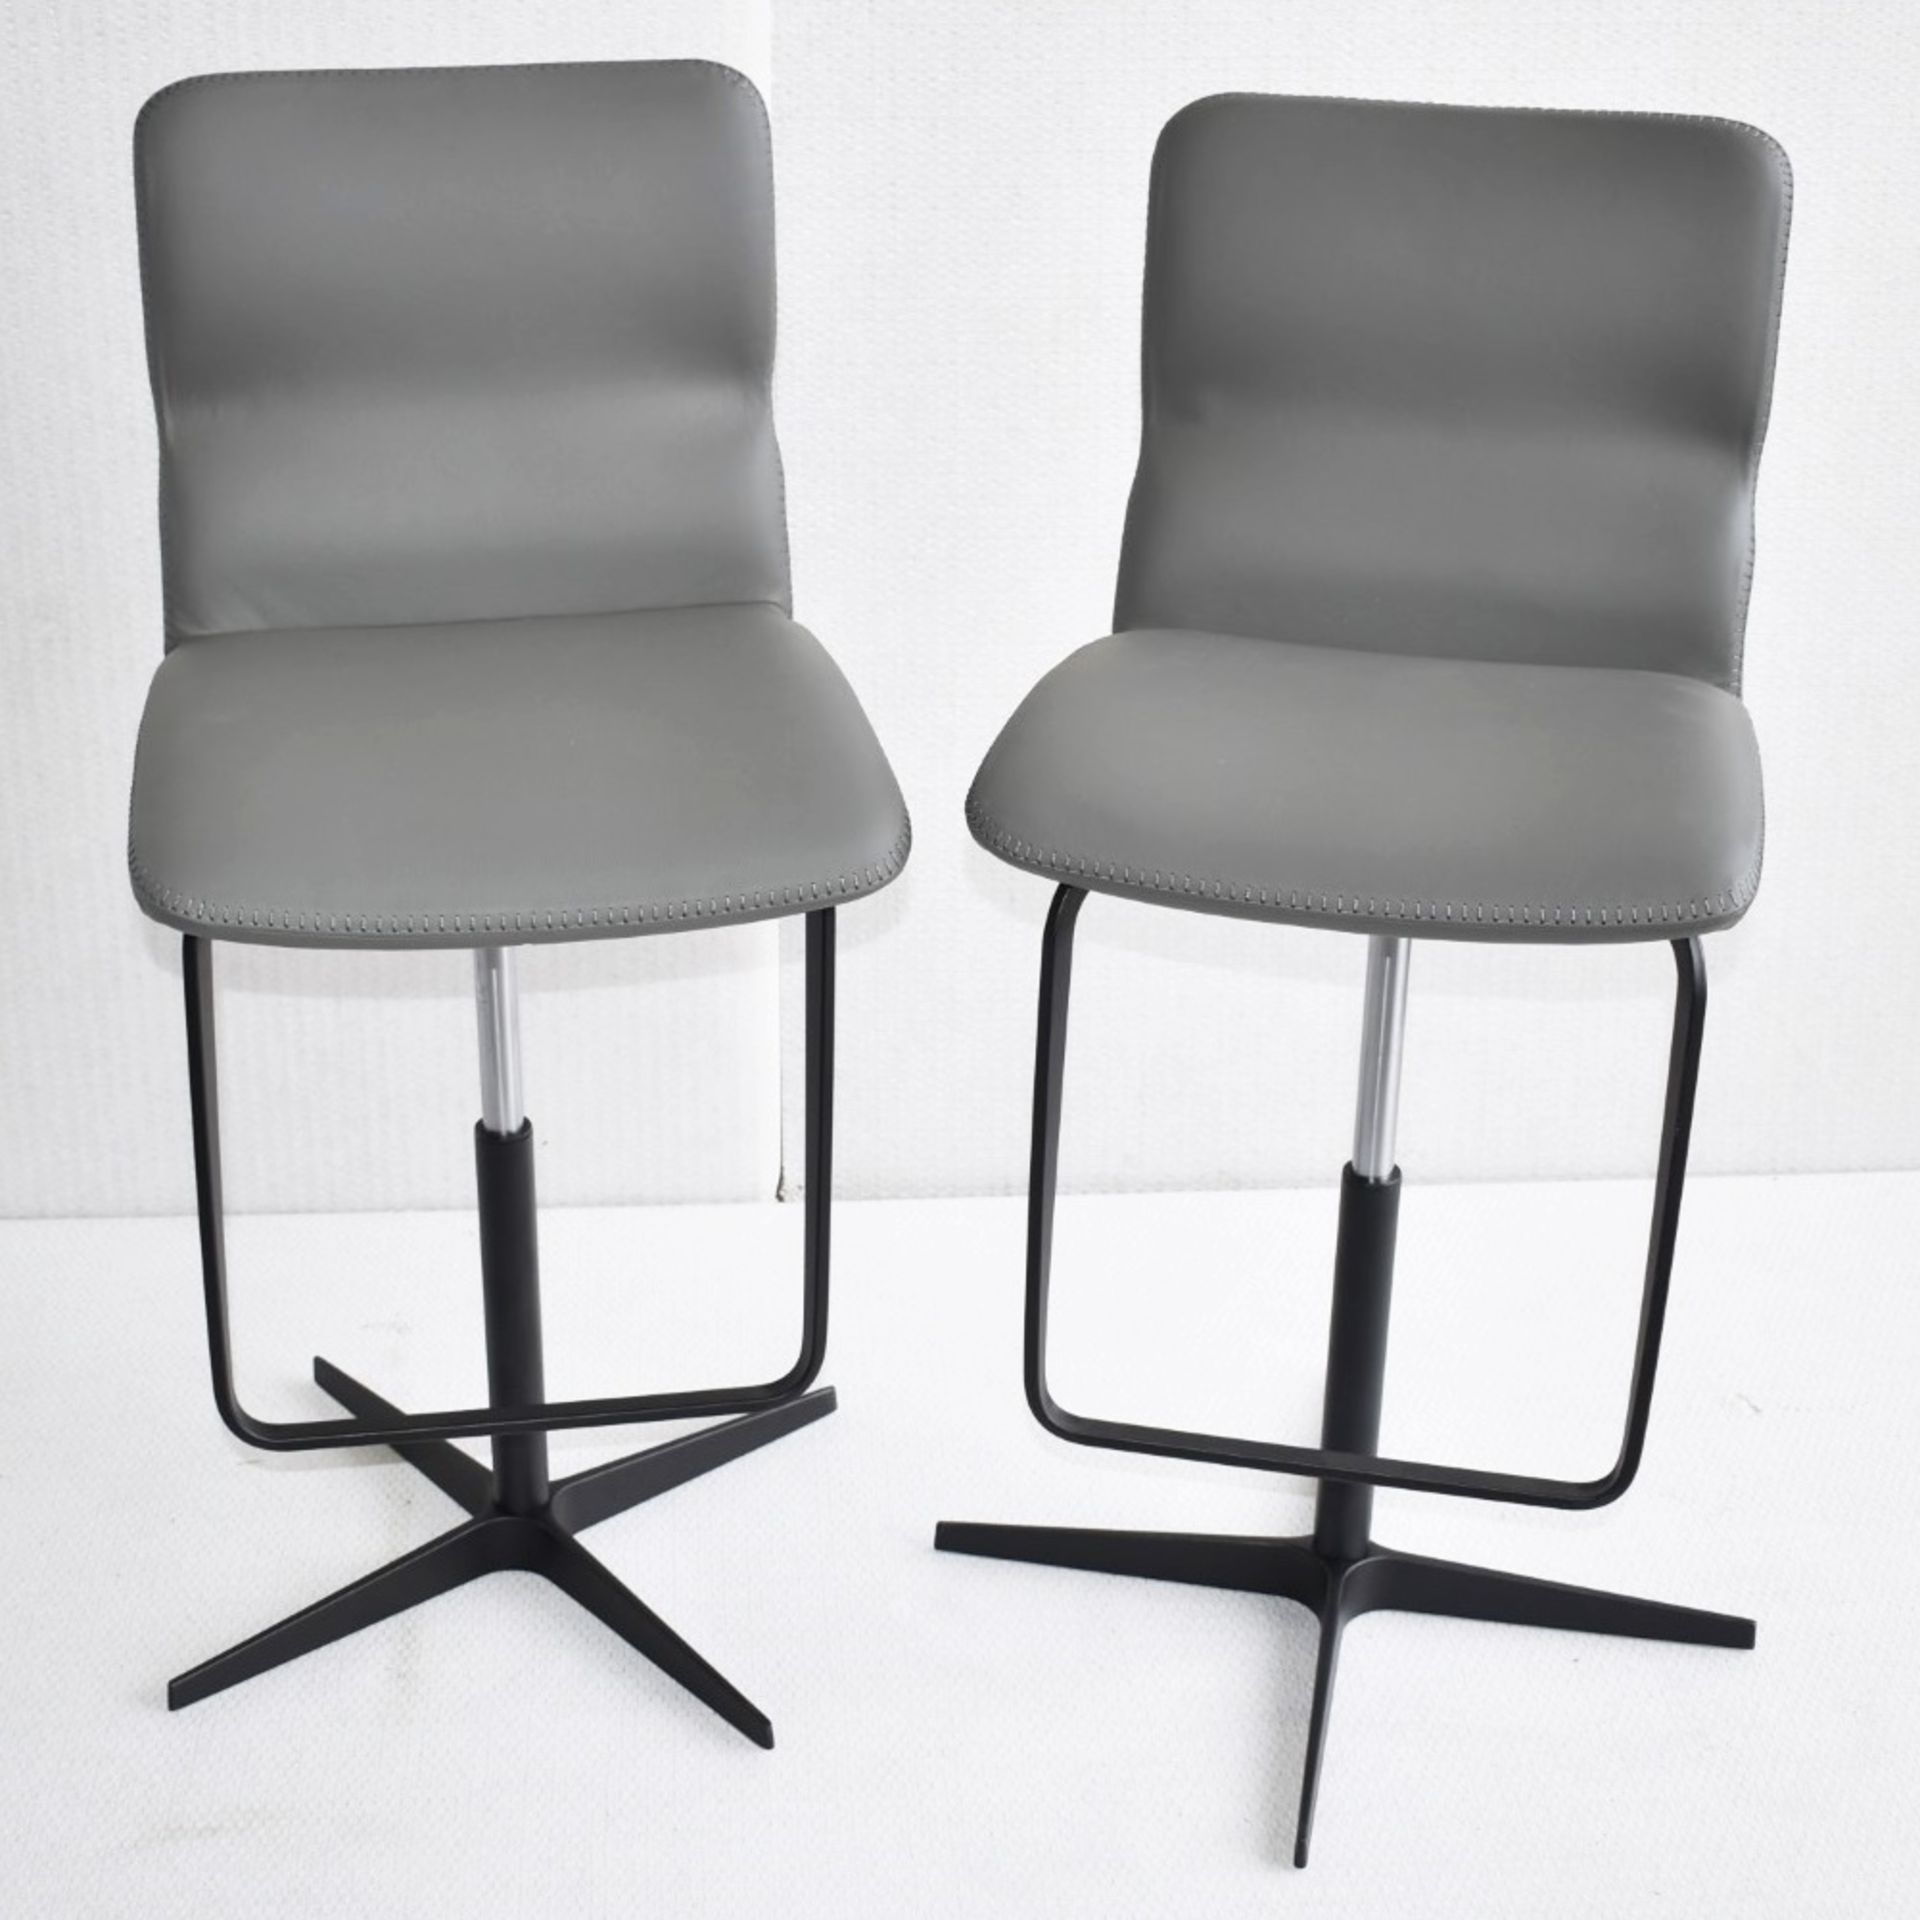 A Pair of CATTELAN ITALIA 'Victor X' Designer Leather Upholstered Barstools - Original Price £1,798 - Image 3 of 13